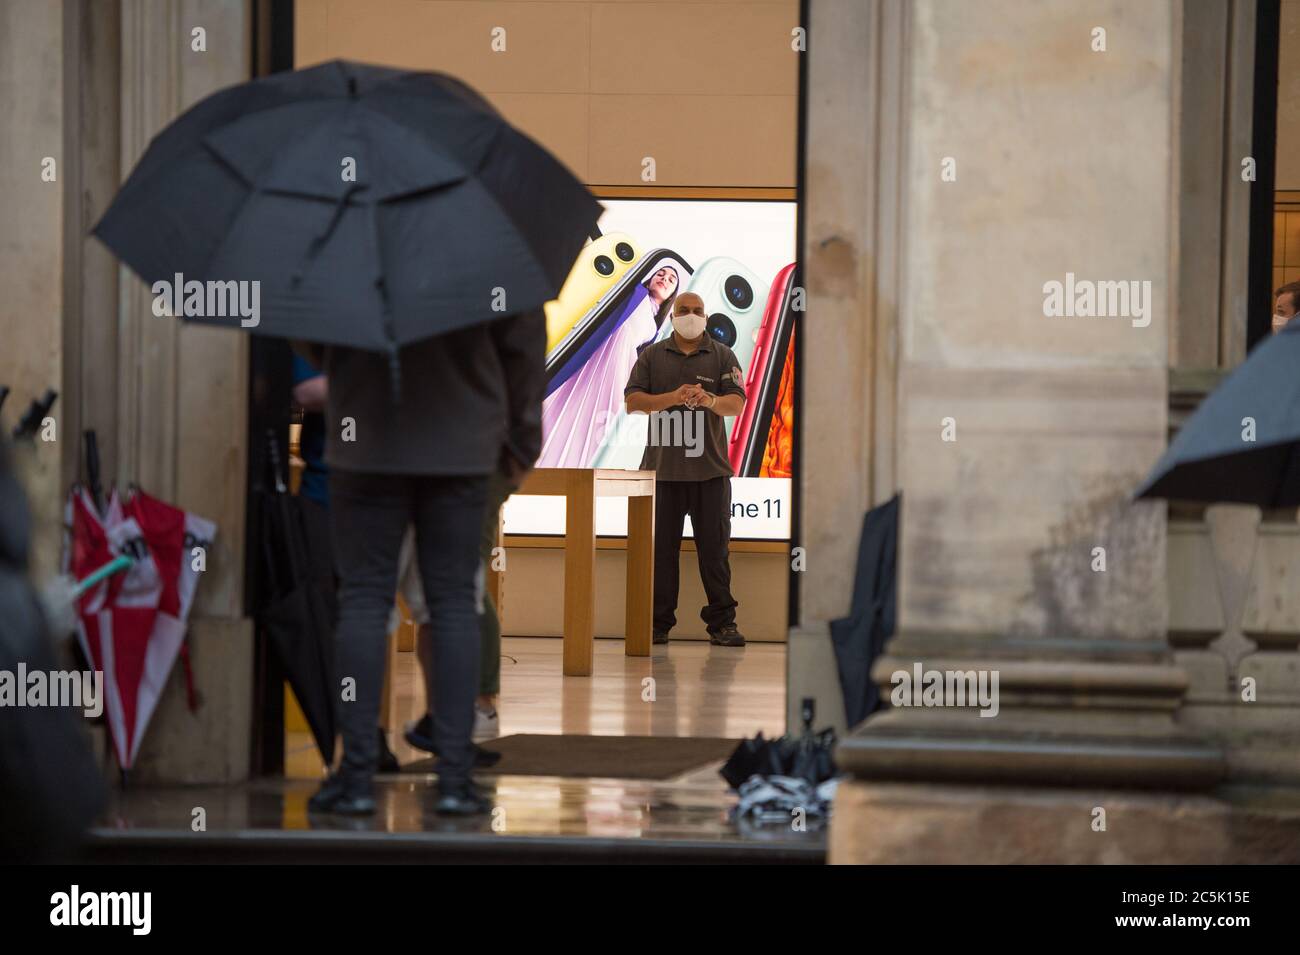 Glasgow, Scotland, UK. 3rd July, 2020. Pictured: Buchanan Street shopping area with shoppers braving the pouring rain using umbrellas and face coverings which will become mandatory on 10th July next week. Credit: Colin Fisher/Alamy Live News Stock Photo